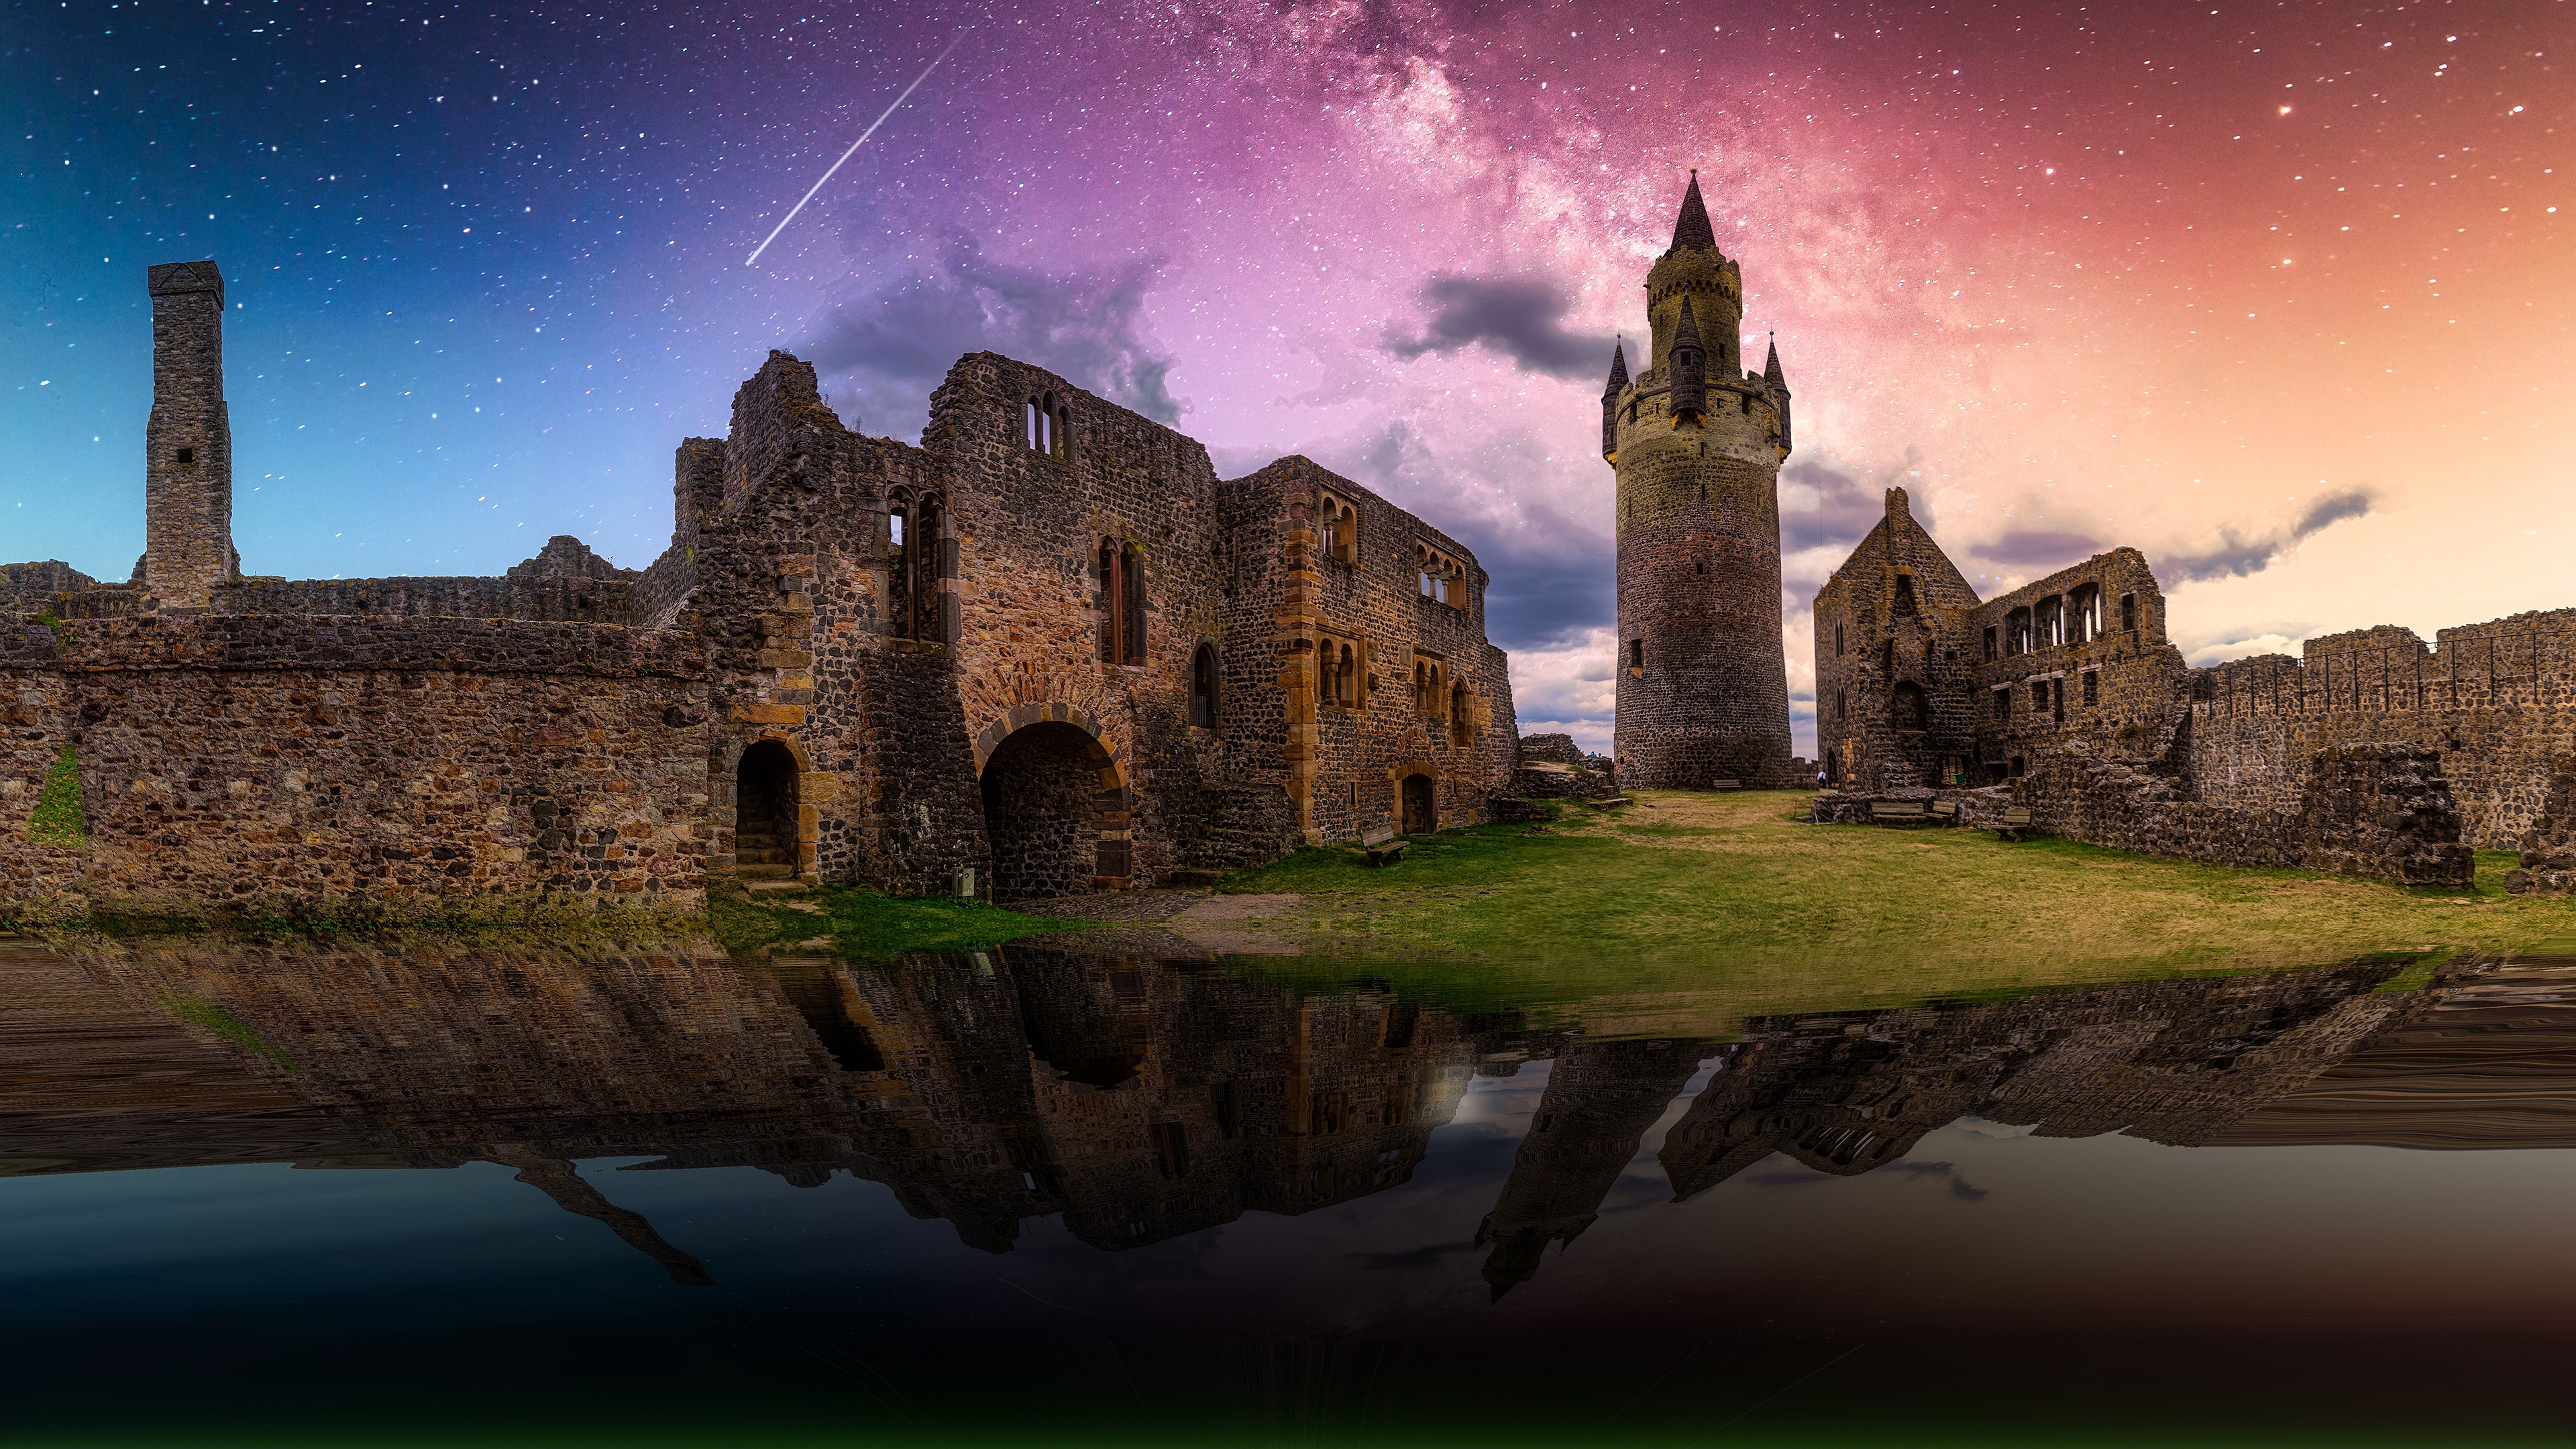 man made, ruin, architecture, castle, cloud, fortress, night, reflection, starry sky, stars 8K